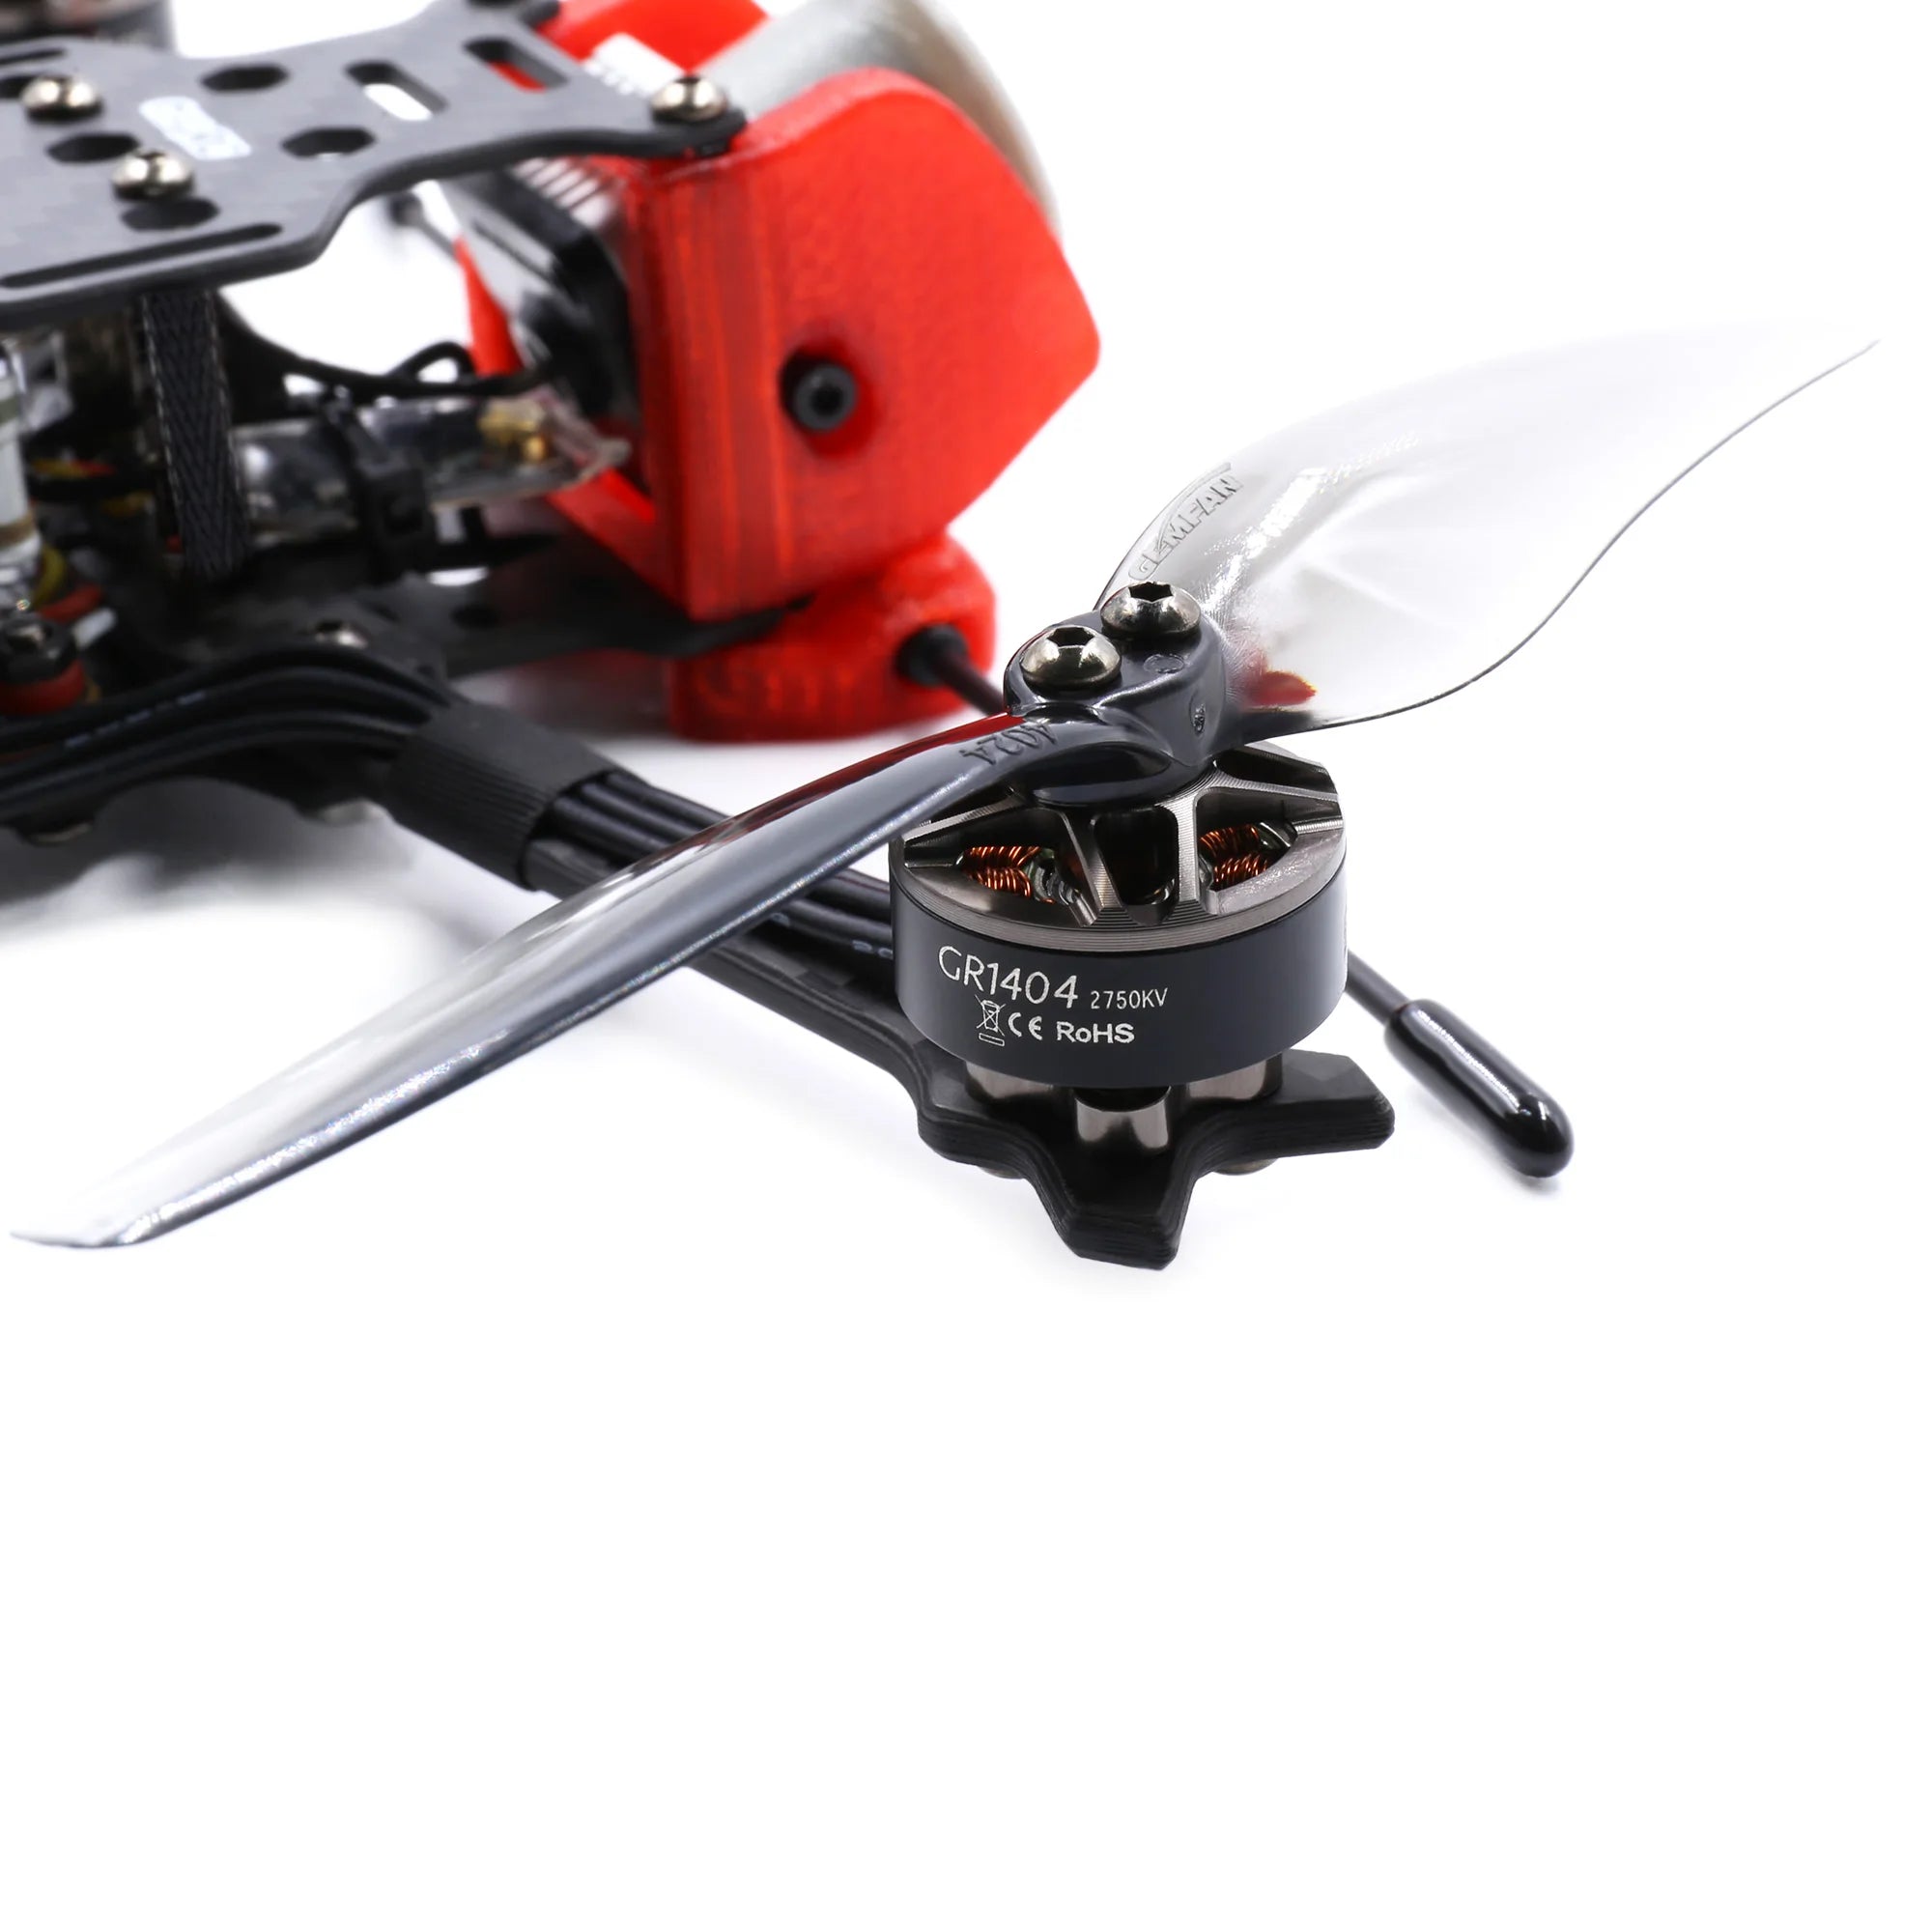 GEPRC Crocodile Baby 4 FPV Drone, Crocodile Baby 4 inch independently designed GPS module, added GPS function . when signal